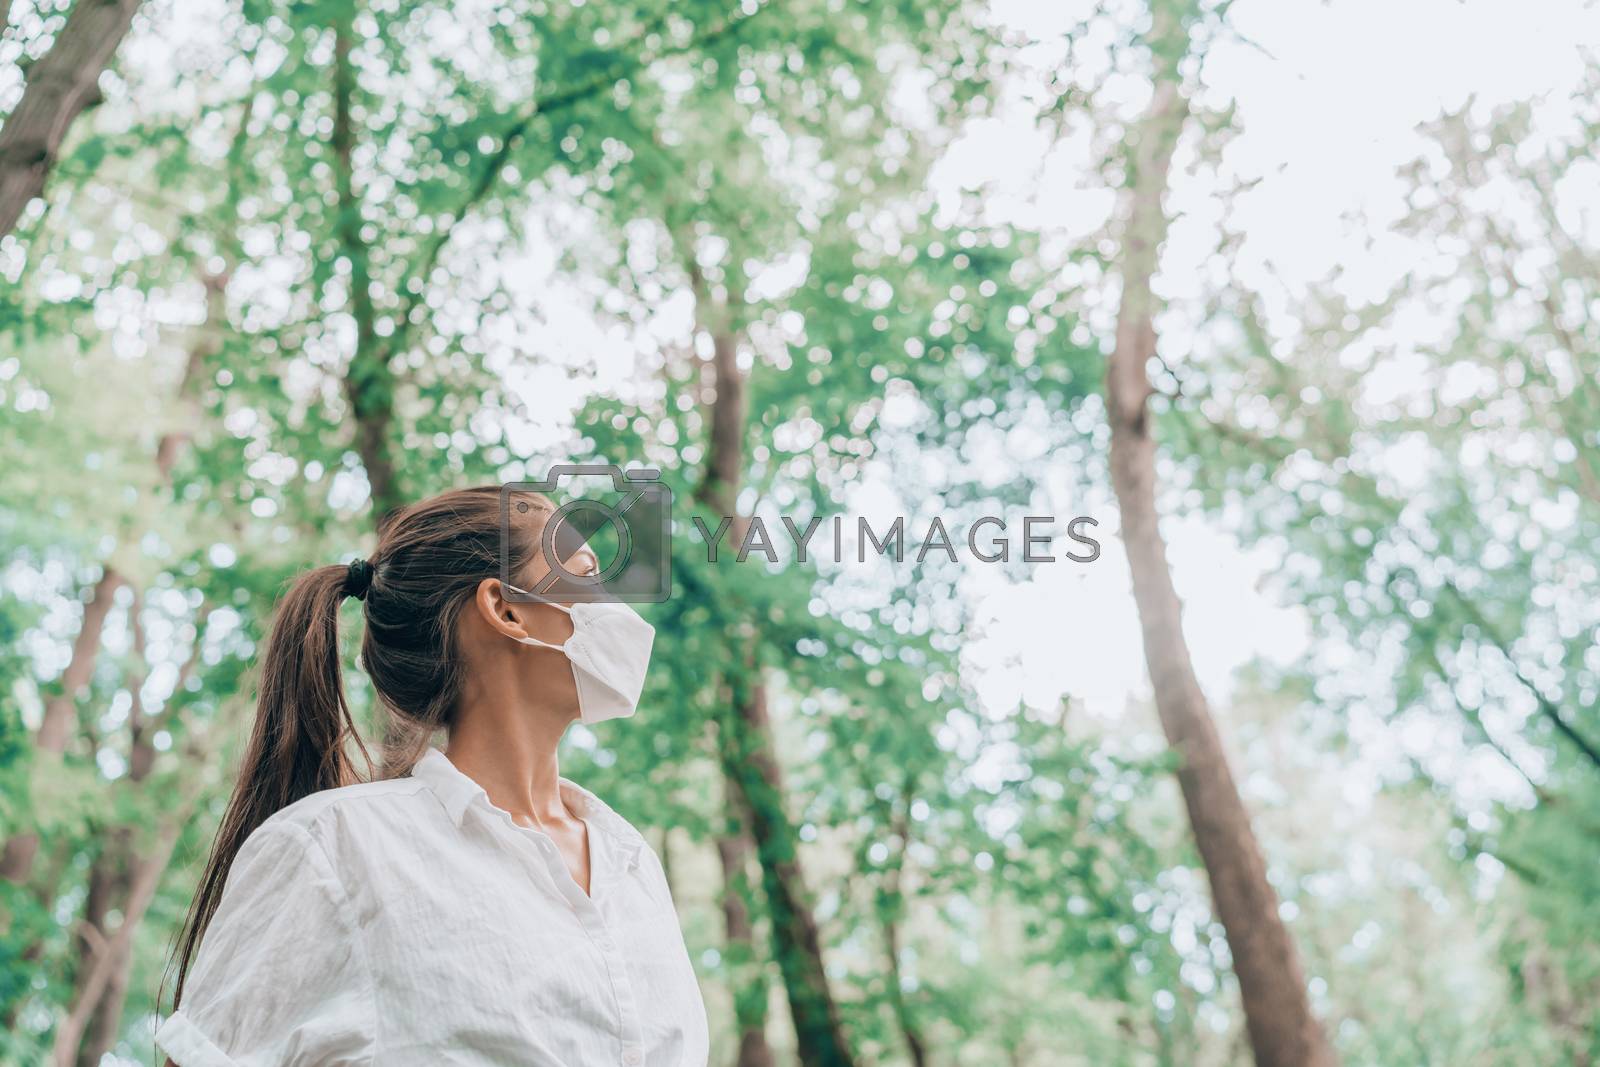 Royalty free image of Woman hiking in forest nature wearing face mask while walking outdoors, looking up at trees in hope. Clean air, sustainability, eco-friendly masks for coronavirus protection concept by Maridav